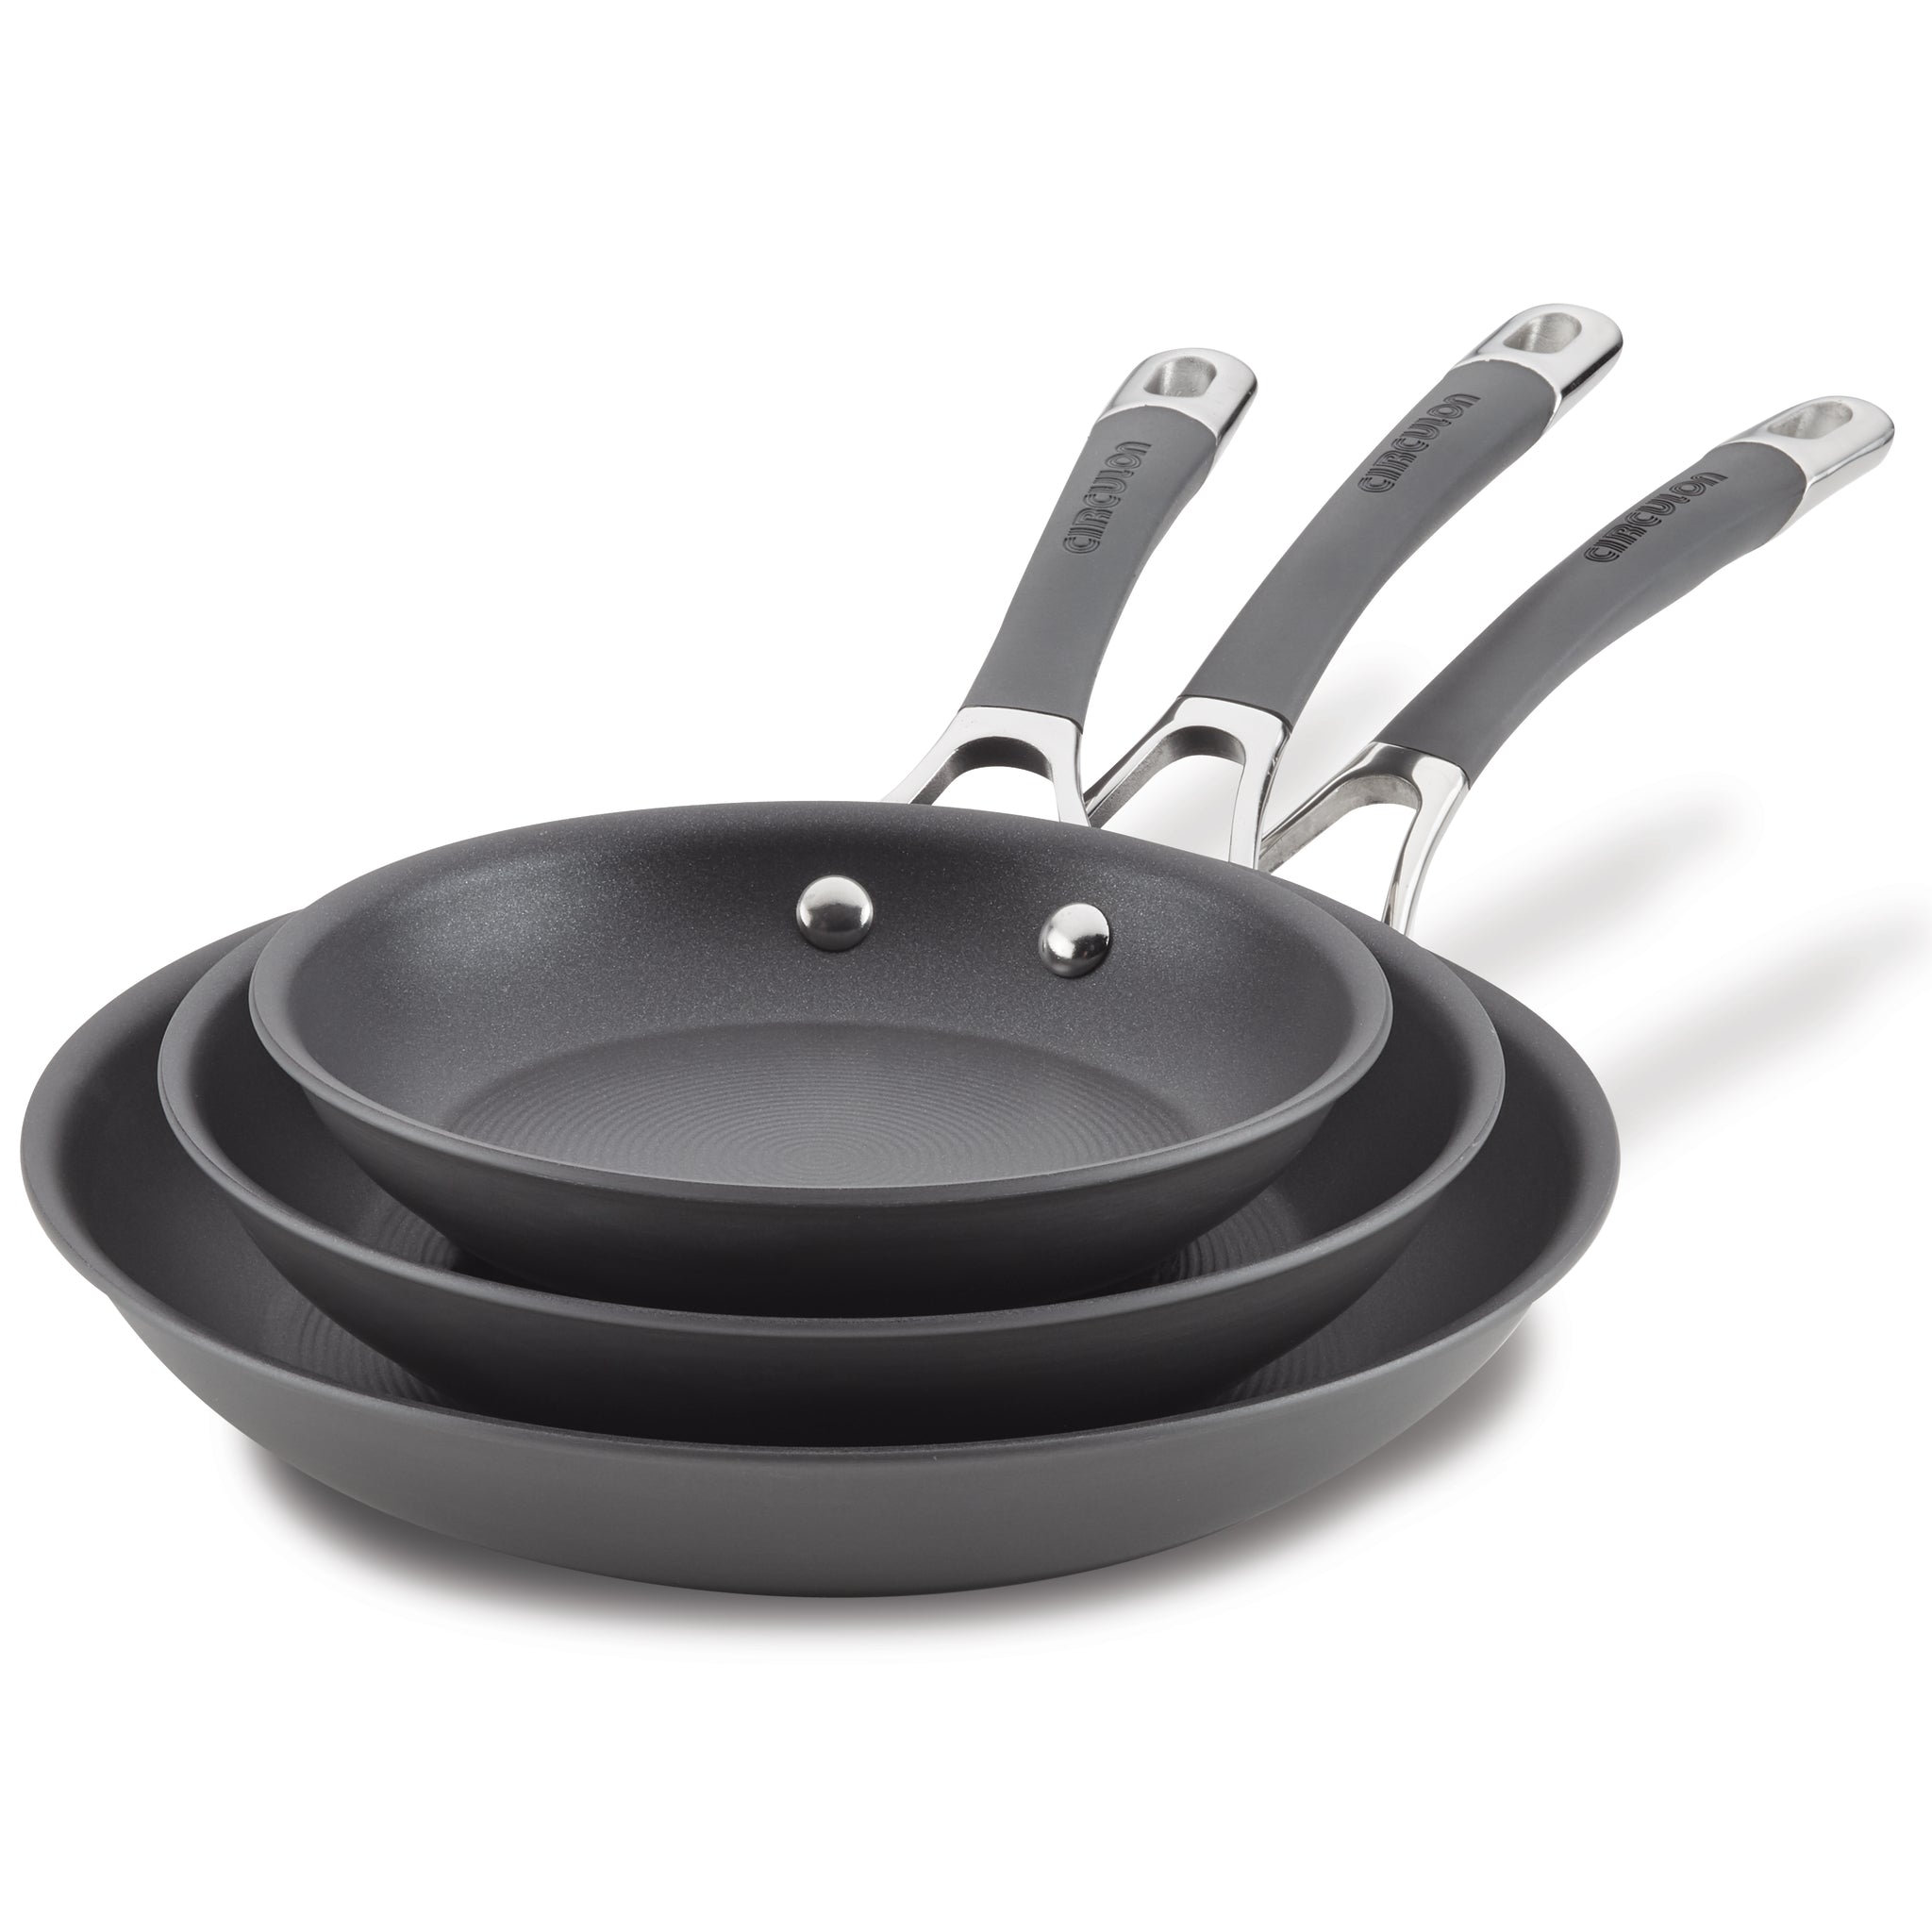 T-Fal Ultimate Hard Anodized Cookware Set - Black, 1 - Fry's Food